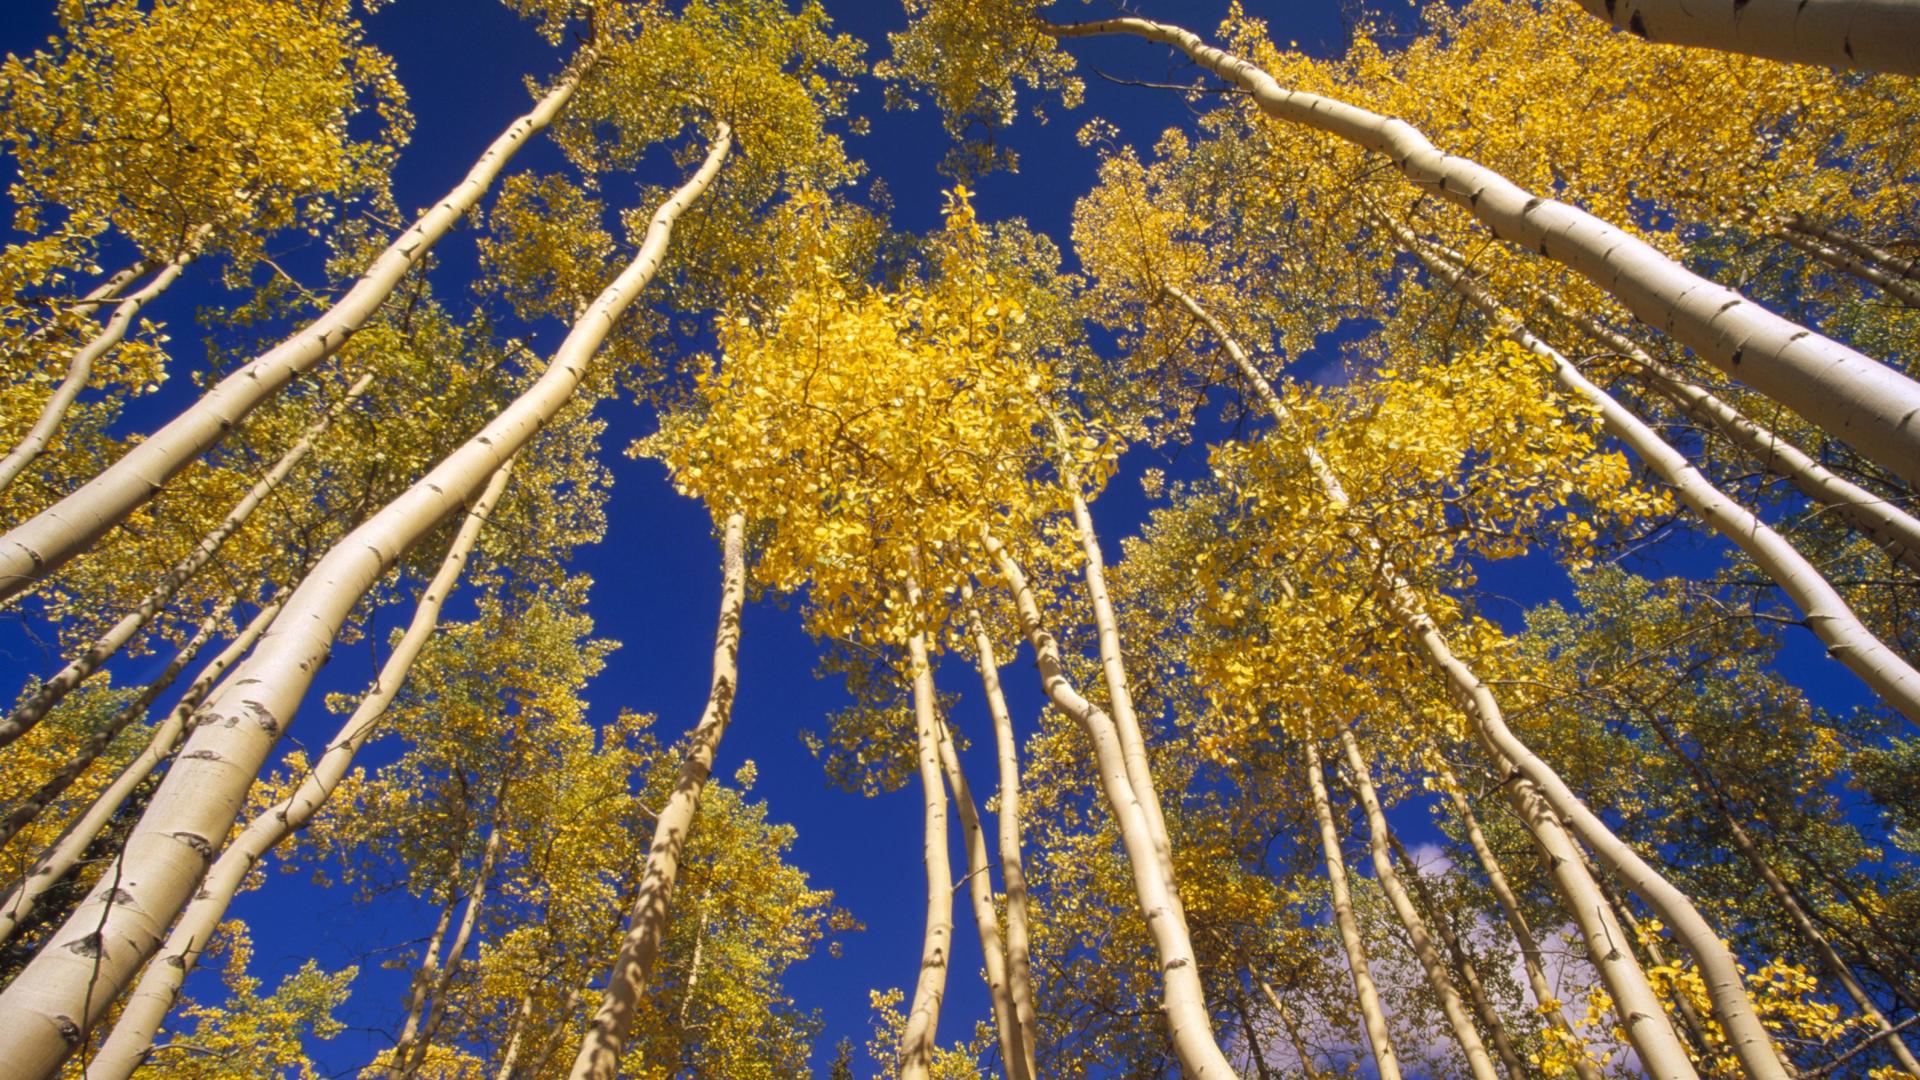 907 Aspen Tree Wallpaper Stock Photos HighRes Pictures and Images   Getty Images